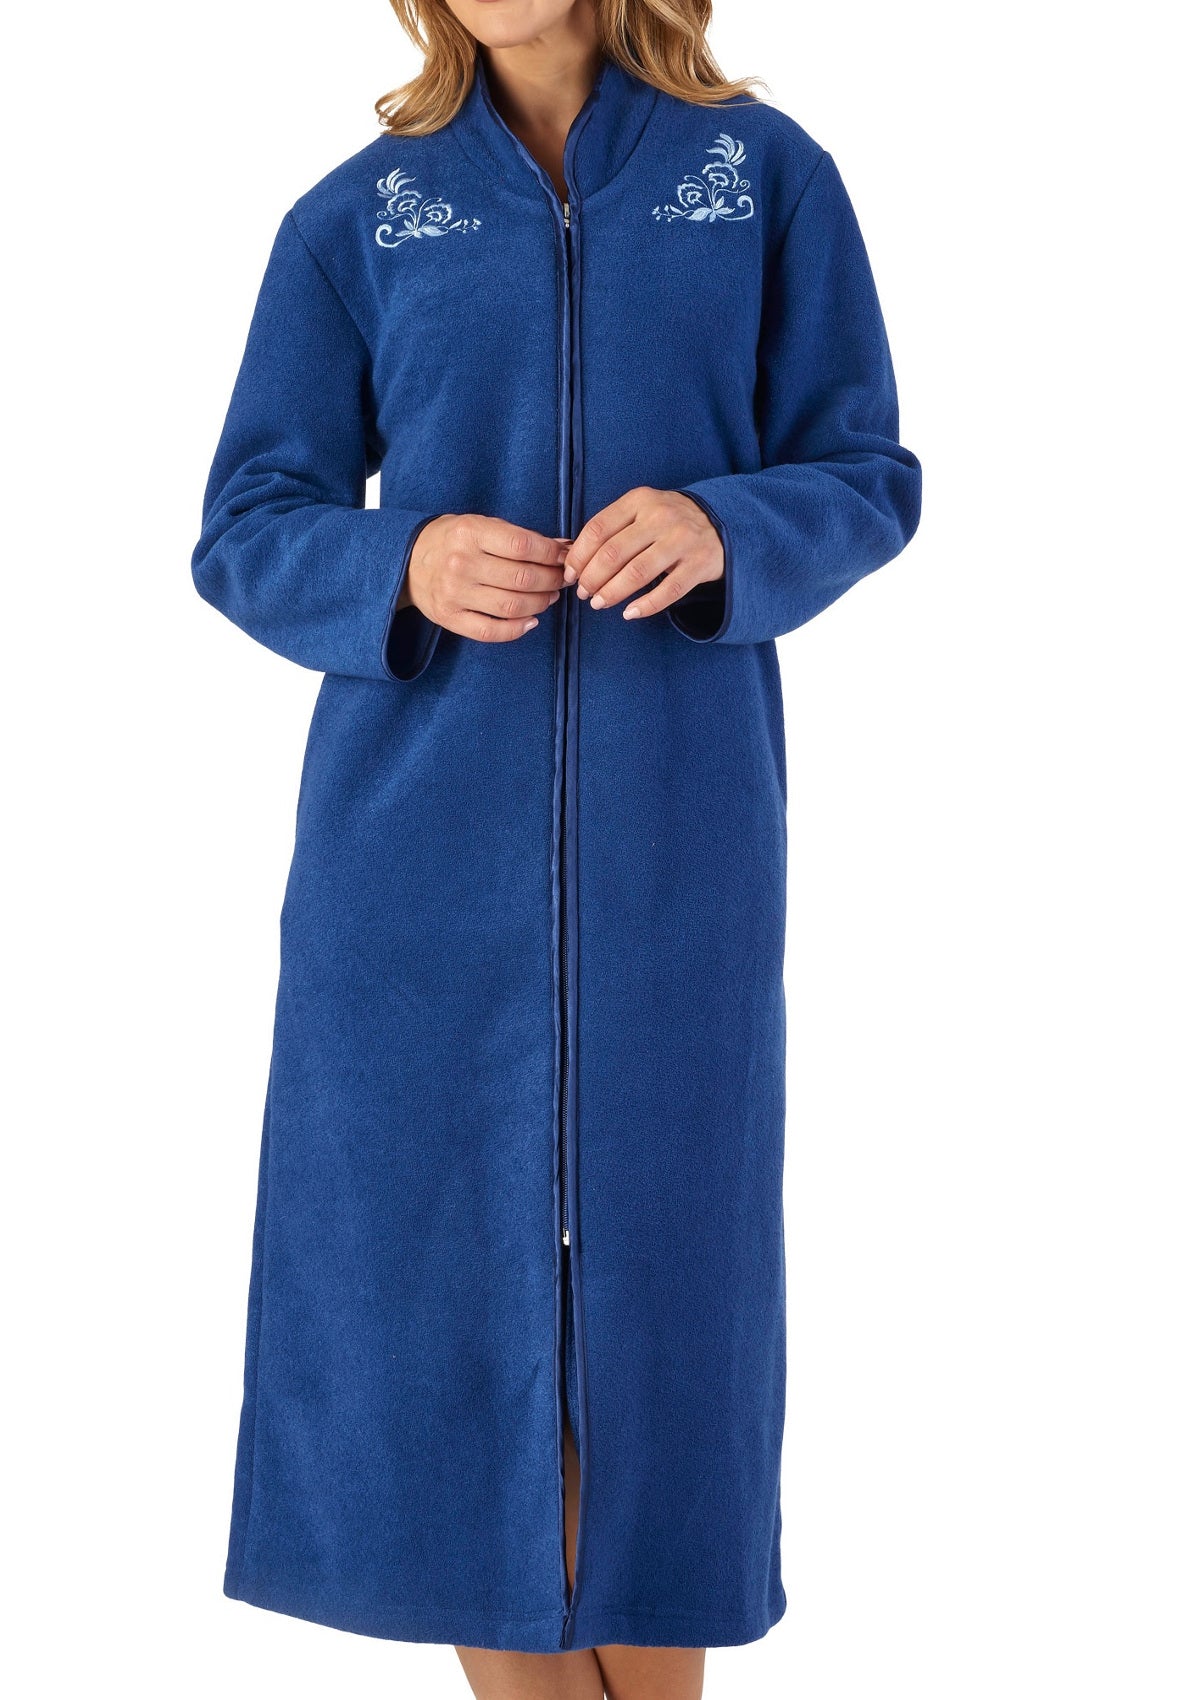 Comfortable Fluffy Dressing Gown for Women and Men,Ladies Fleece Robes  Belted Full Length Bathrobes with Pockets Super Soft Plush Fleece Pyjamas  Couples Fluffy Loungewear Winter Long Nightgowns: Buy Online at Best Price